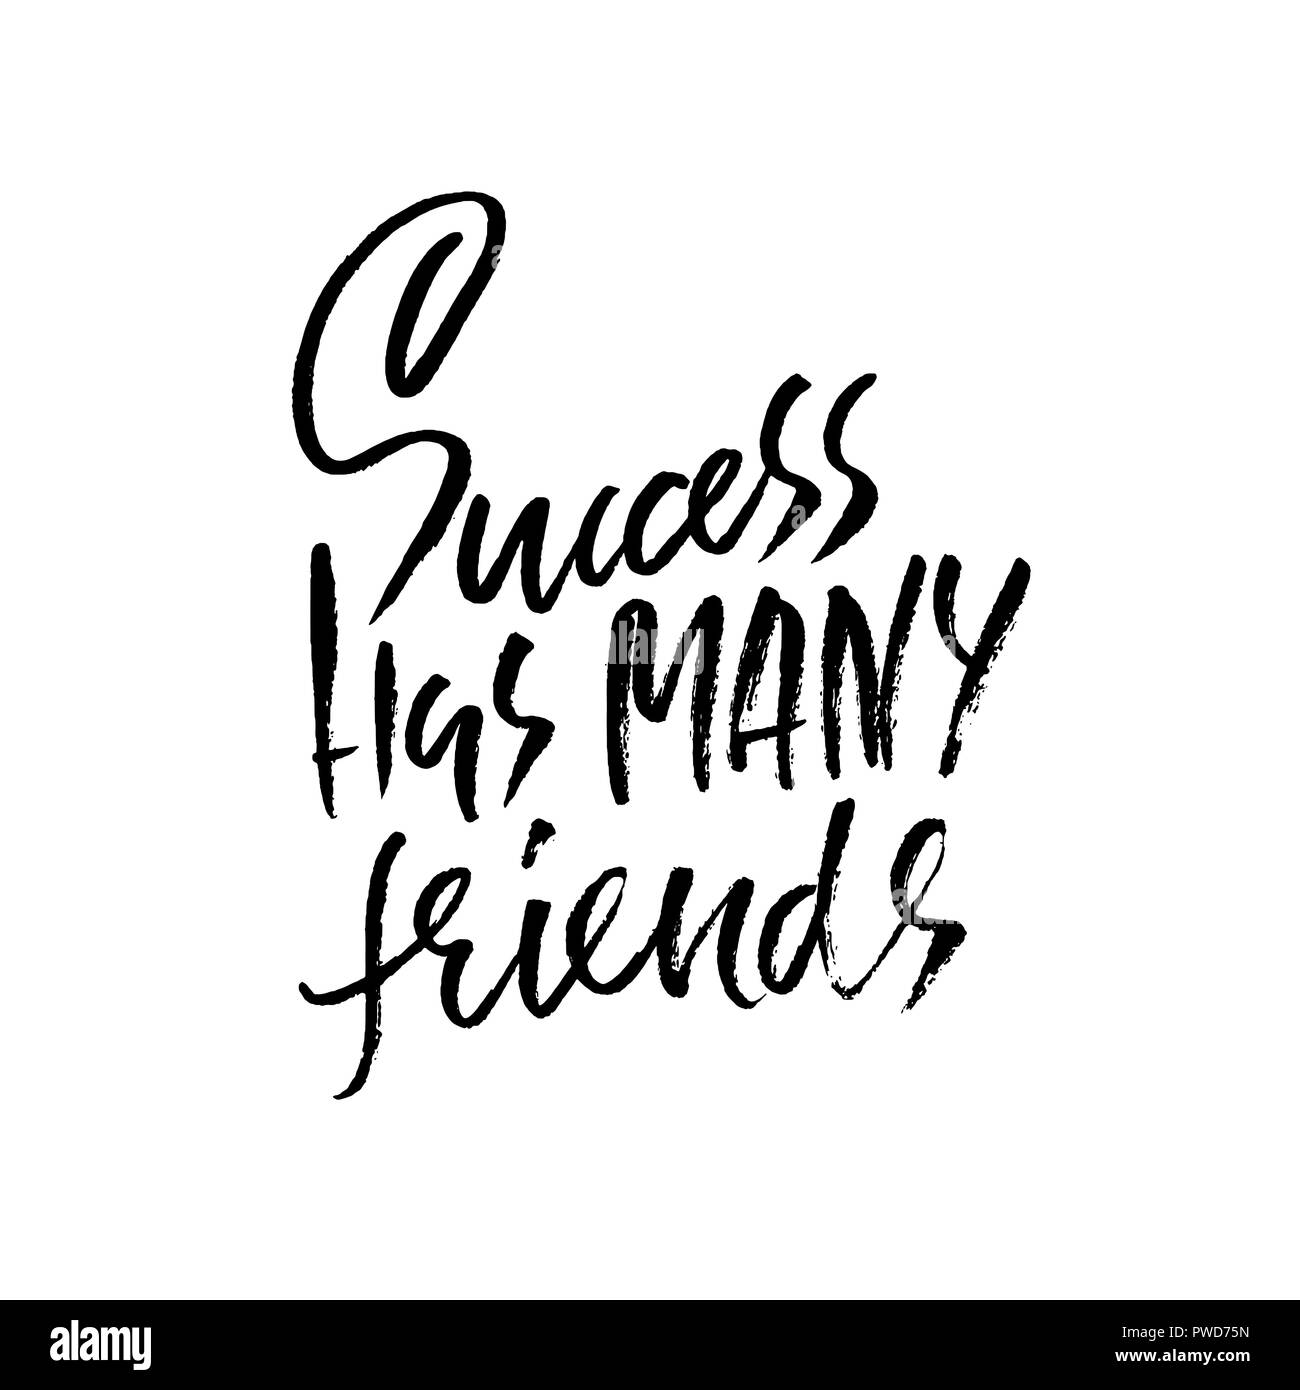 Success has many friends. Hand drawn dry brush lettering. Ink illustration. Modern calligraphy phrase. Vector illustration. Stock Vector